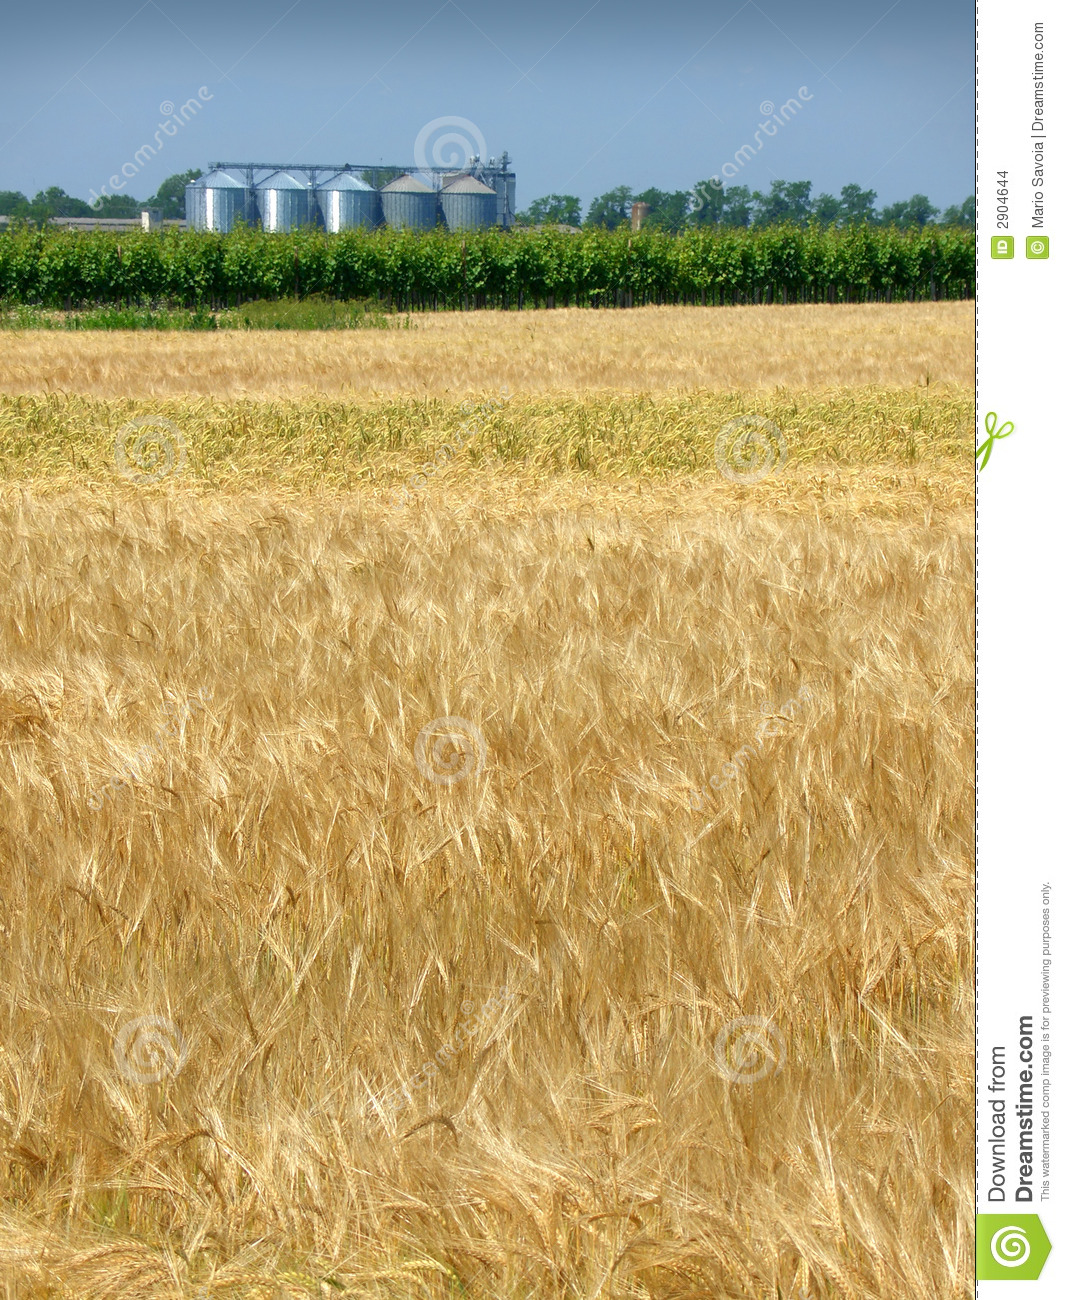 Wheat Field In Spring And Silo Stock Images   Image  2904644